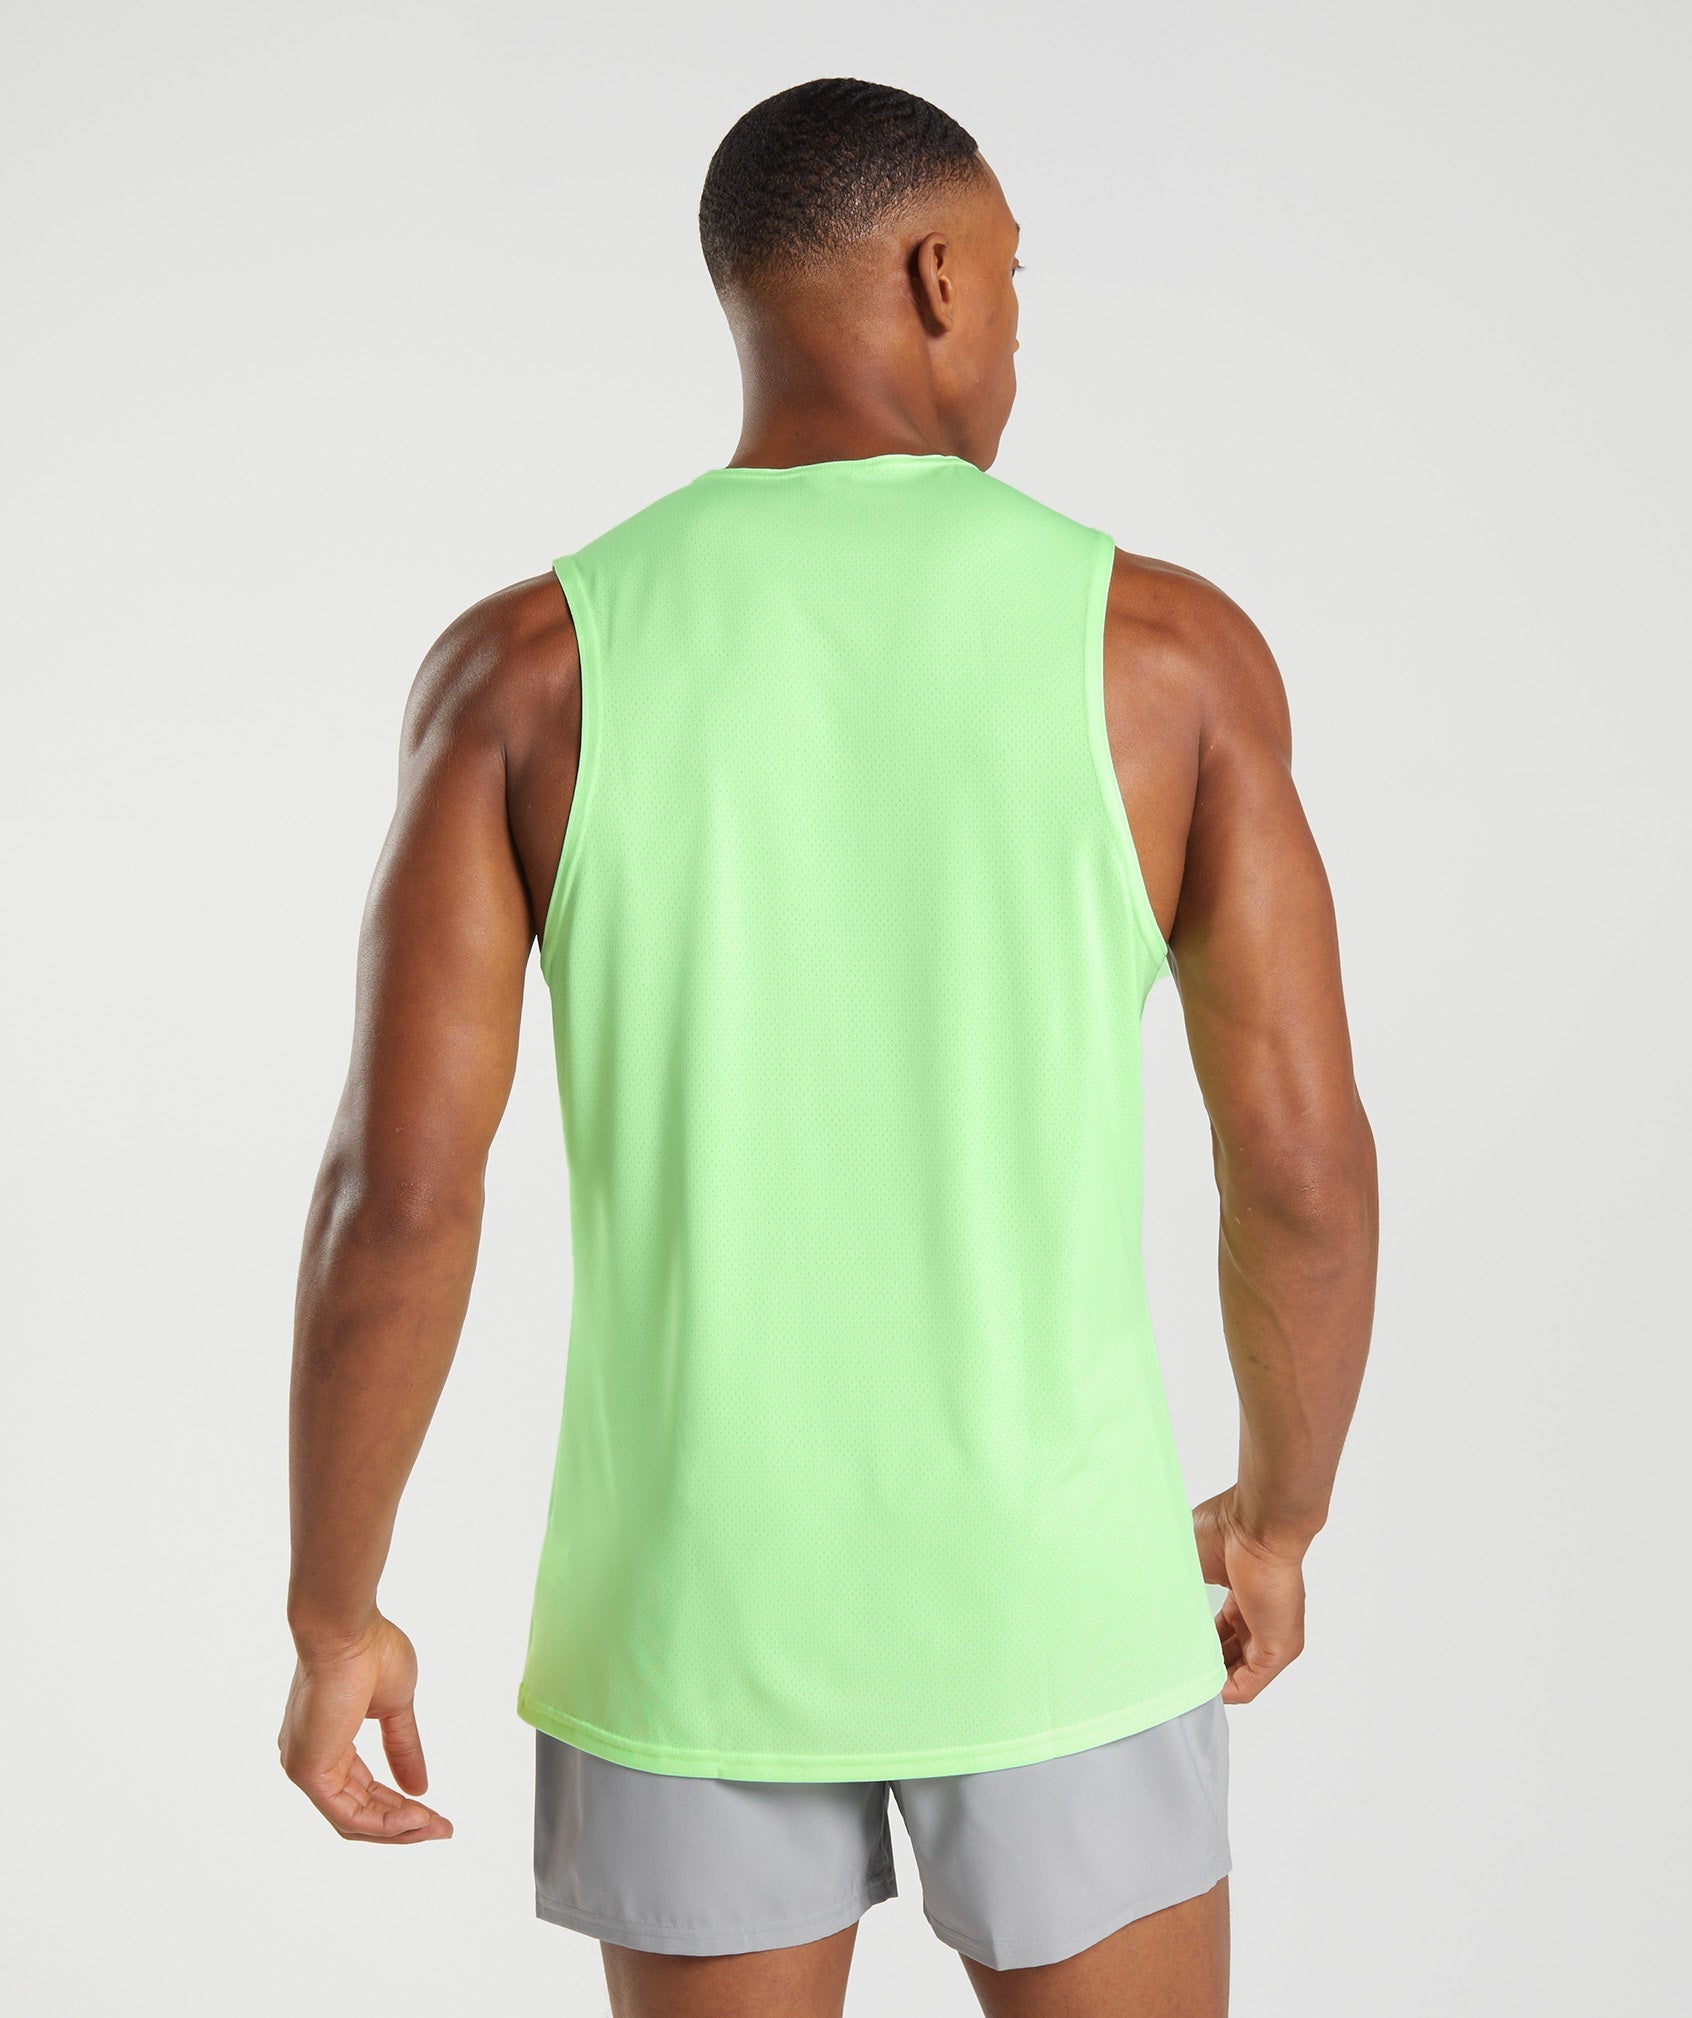 Arrival Tank in Fluo Mint - view 2